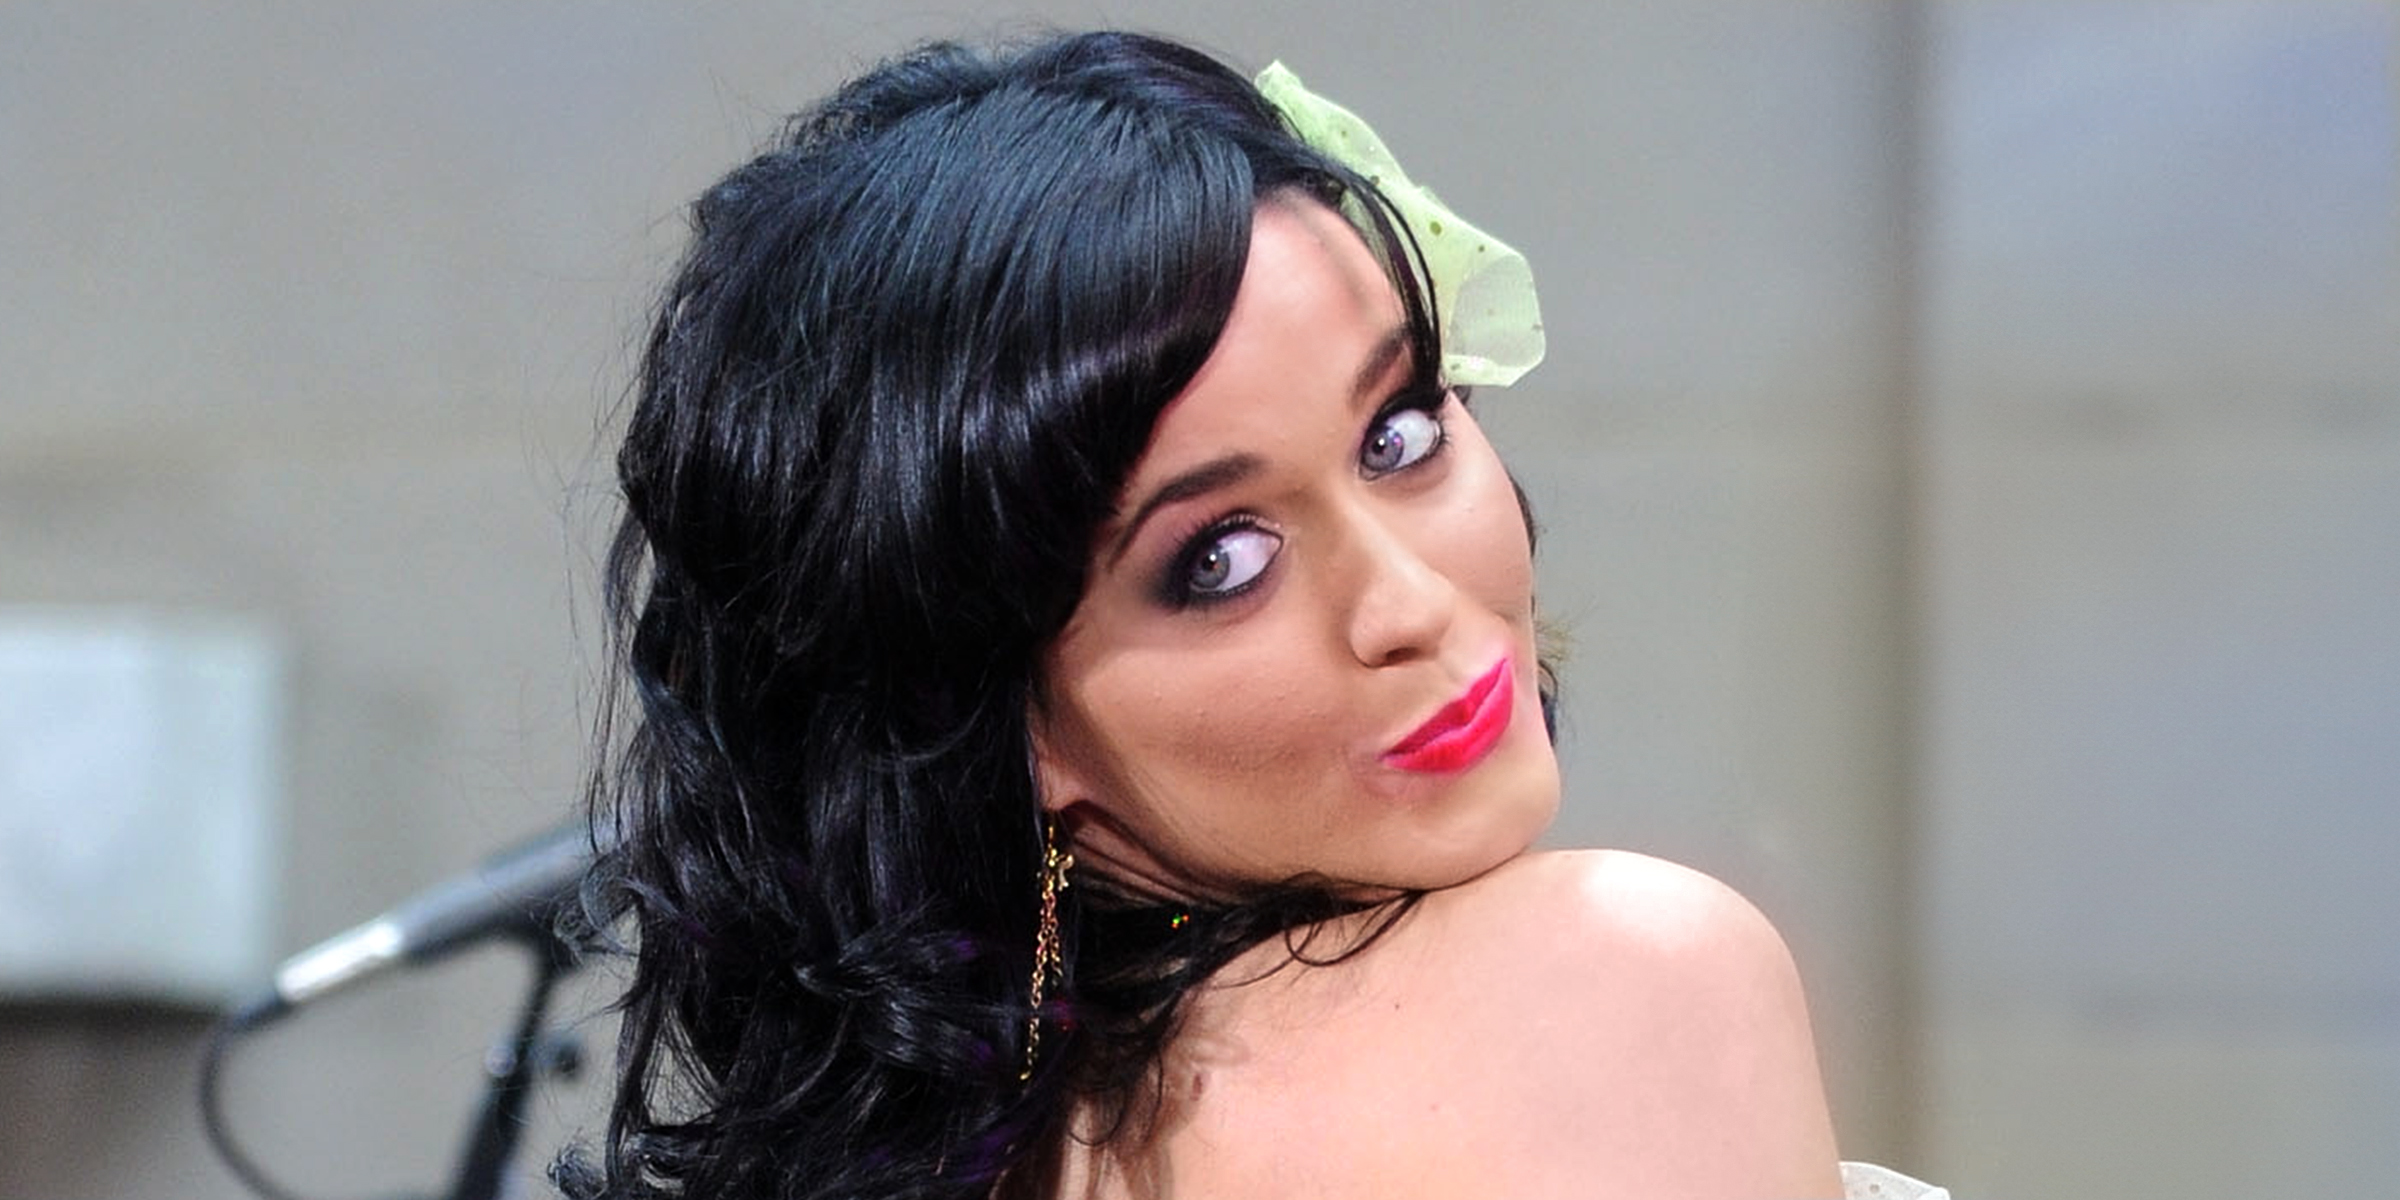 Katy Perry | Source: Getty Images